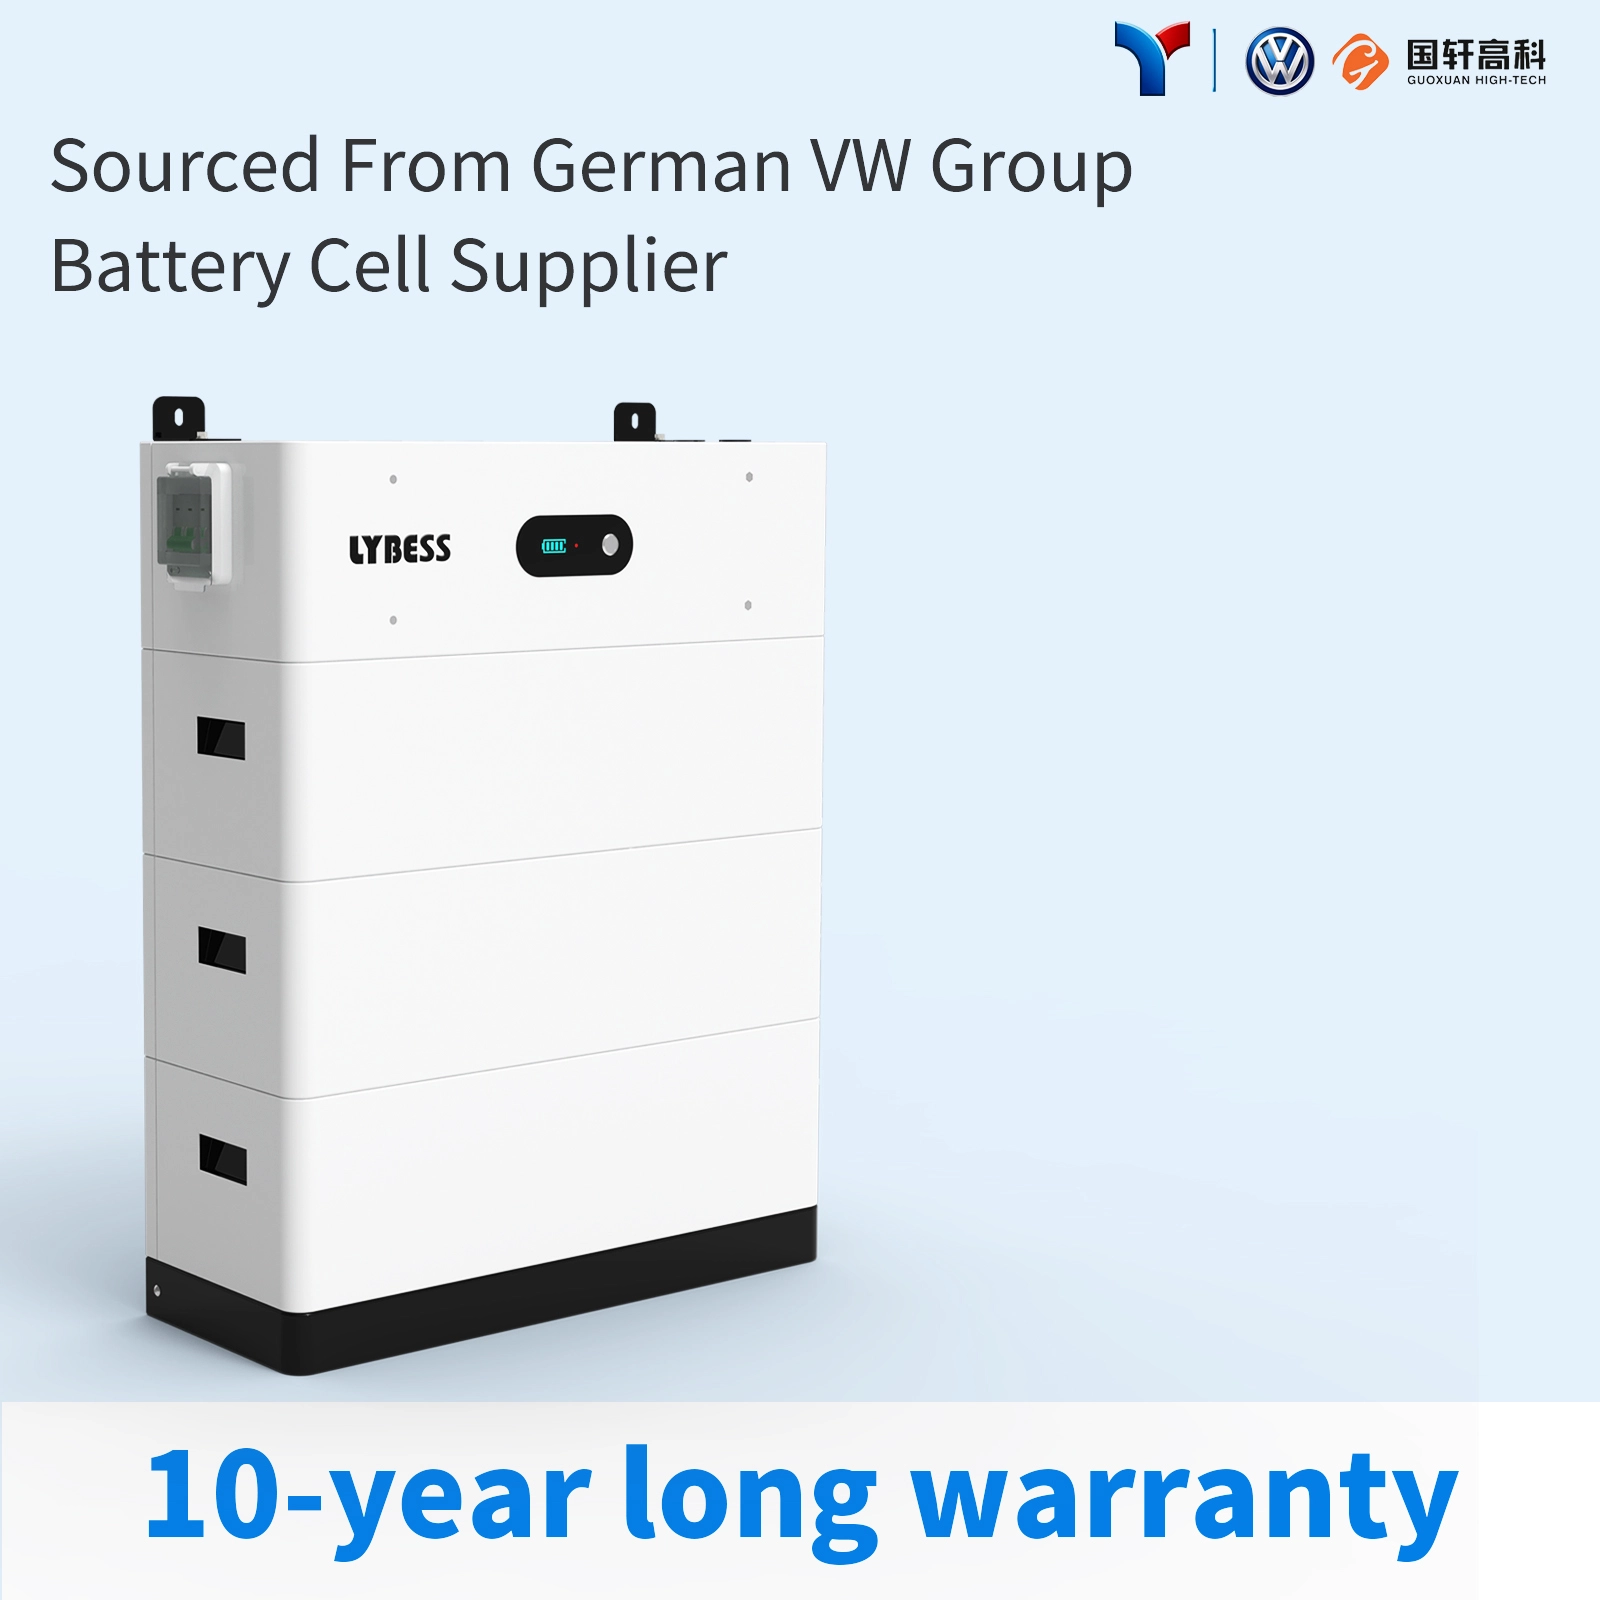 336V52Ah 17.5KWh High Voltage Stackable Battery